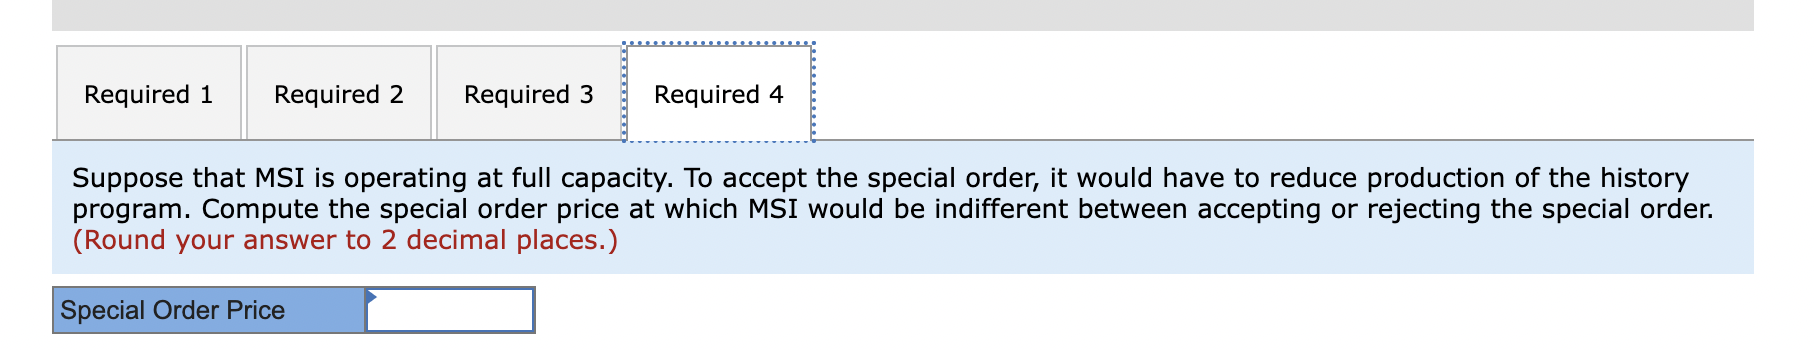 Required 1 Required 2 Required 3 Required 4 Suppose that MSI is operating at full capacity. To accept the special order, it w